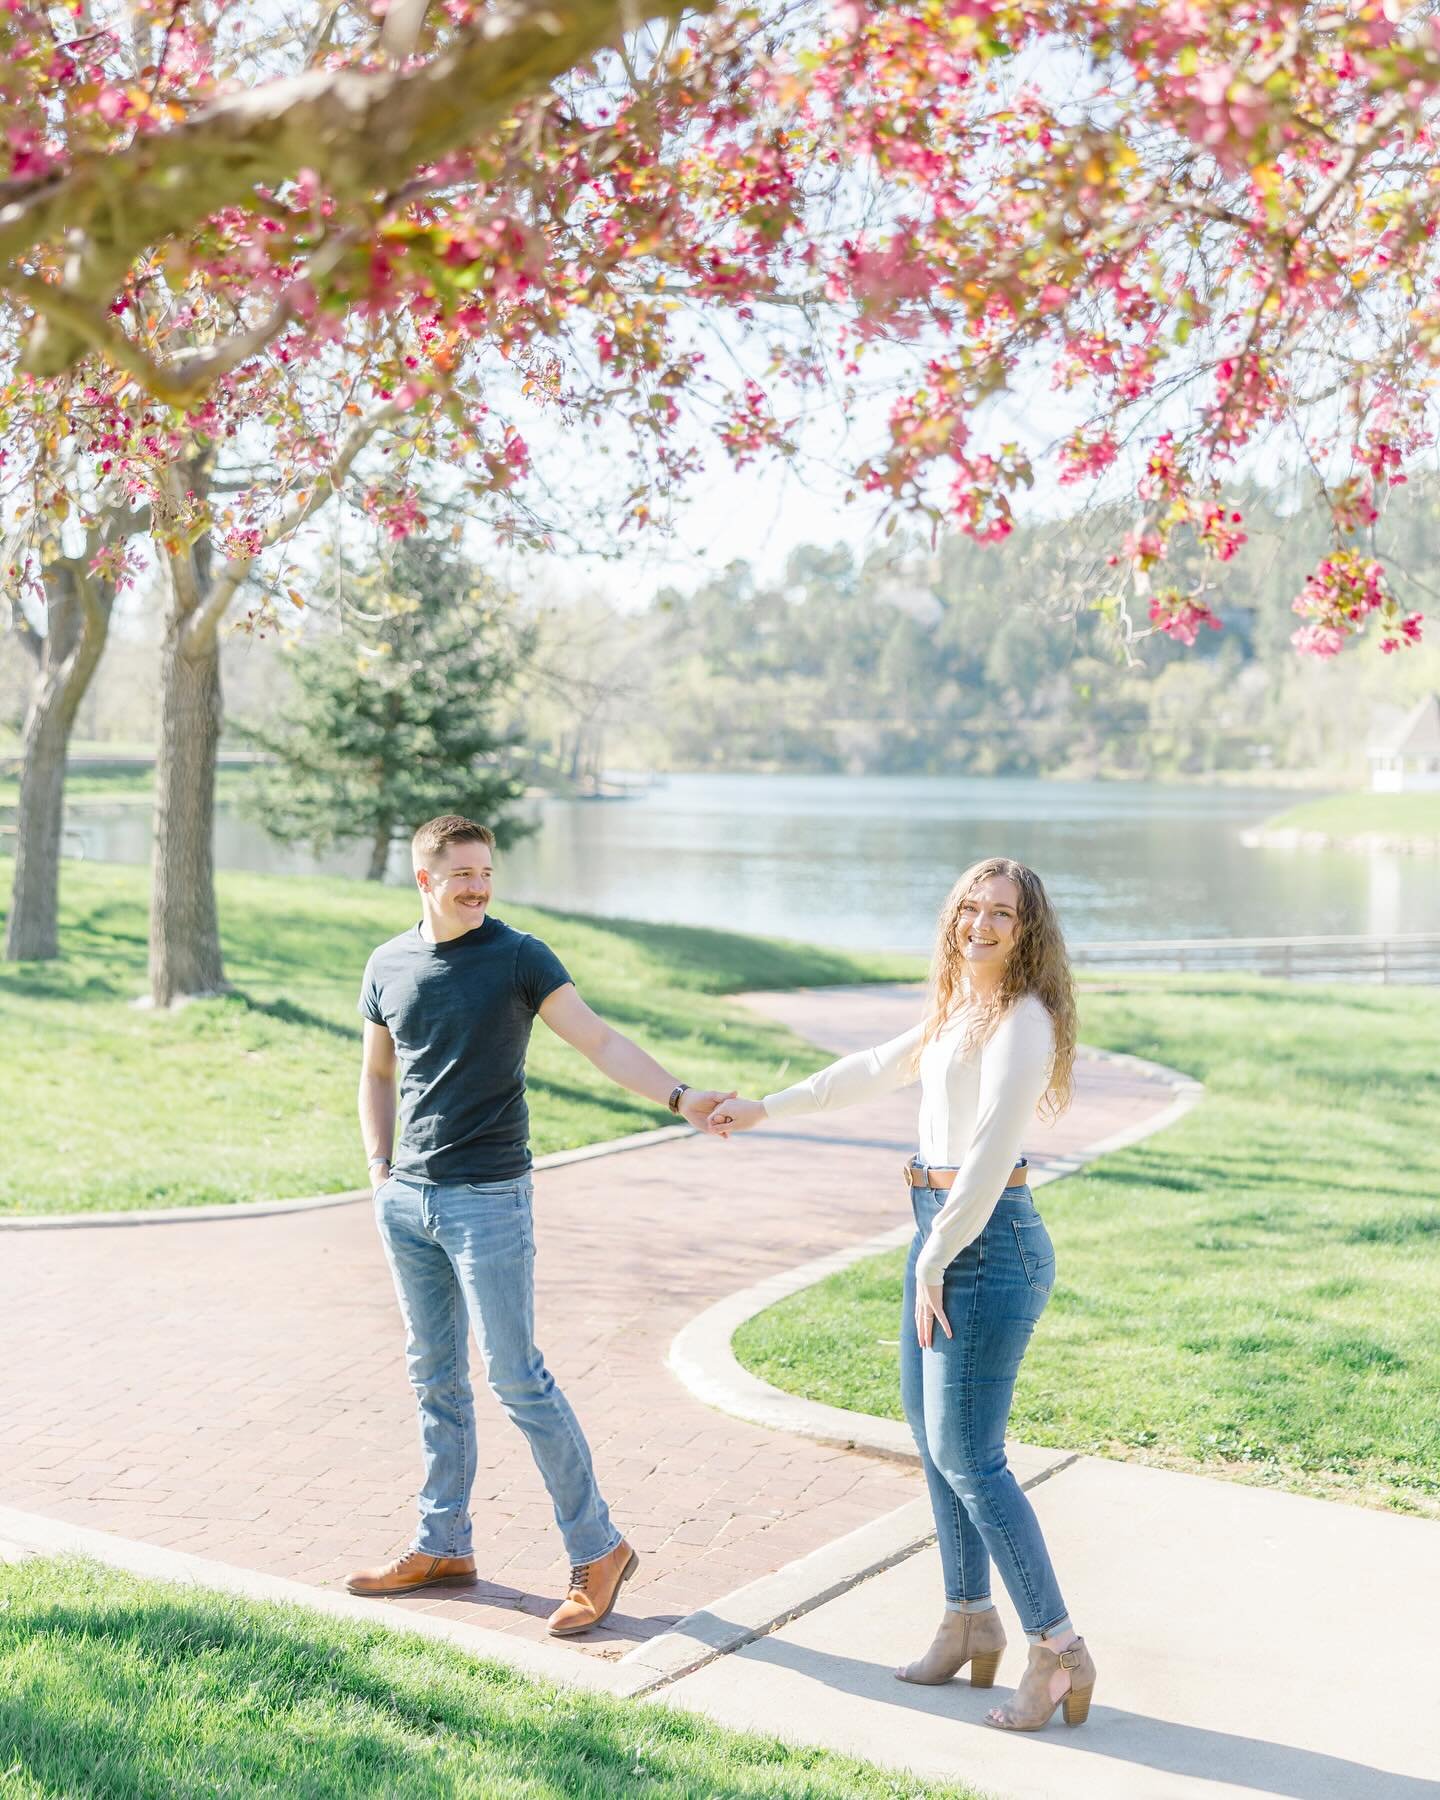 So many amazing engagement sessions lately! I had the best morning the other day with Cassidy &amp; Connor and their sweet little pup taking their engagement photos. I&rsquo;ll wait to share my faves until the film arrives, but I couldn&rsquo;t wait 